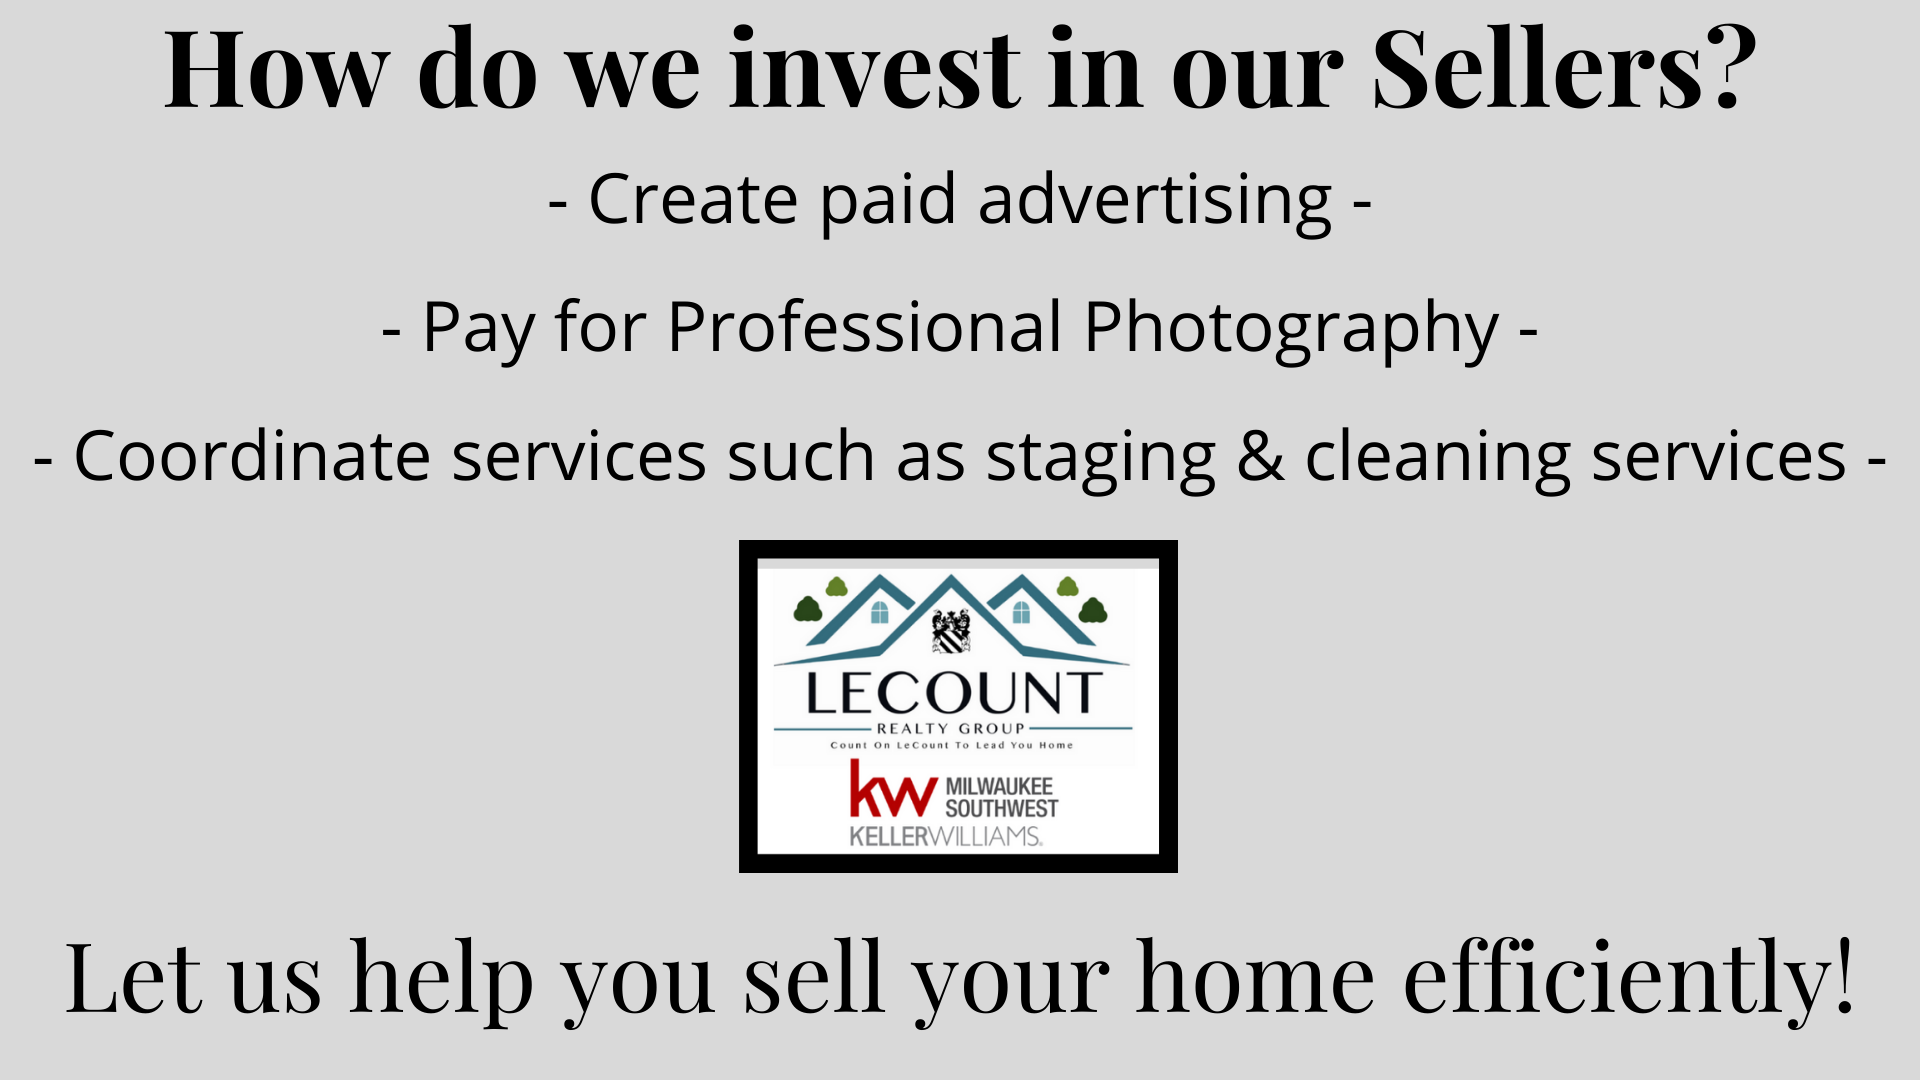 We can sell your home efficiently